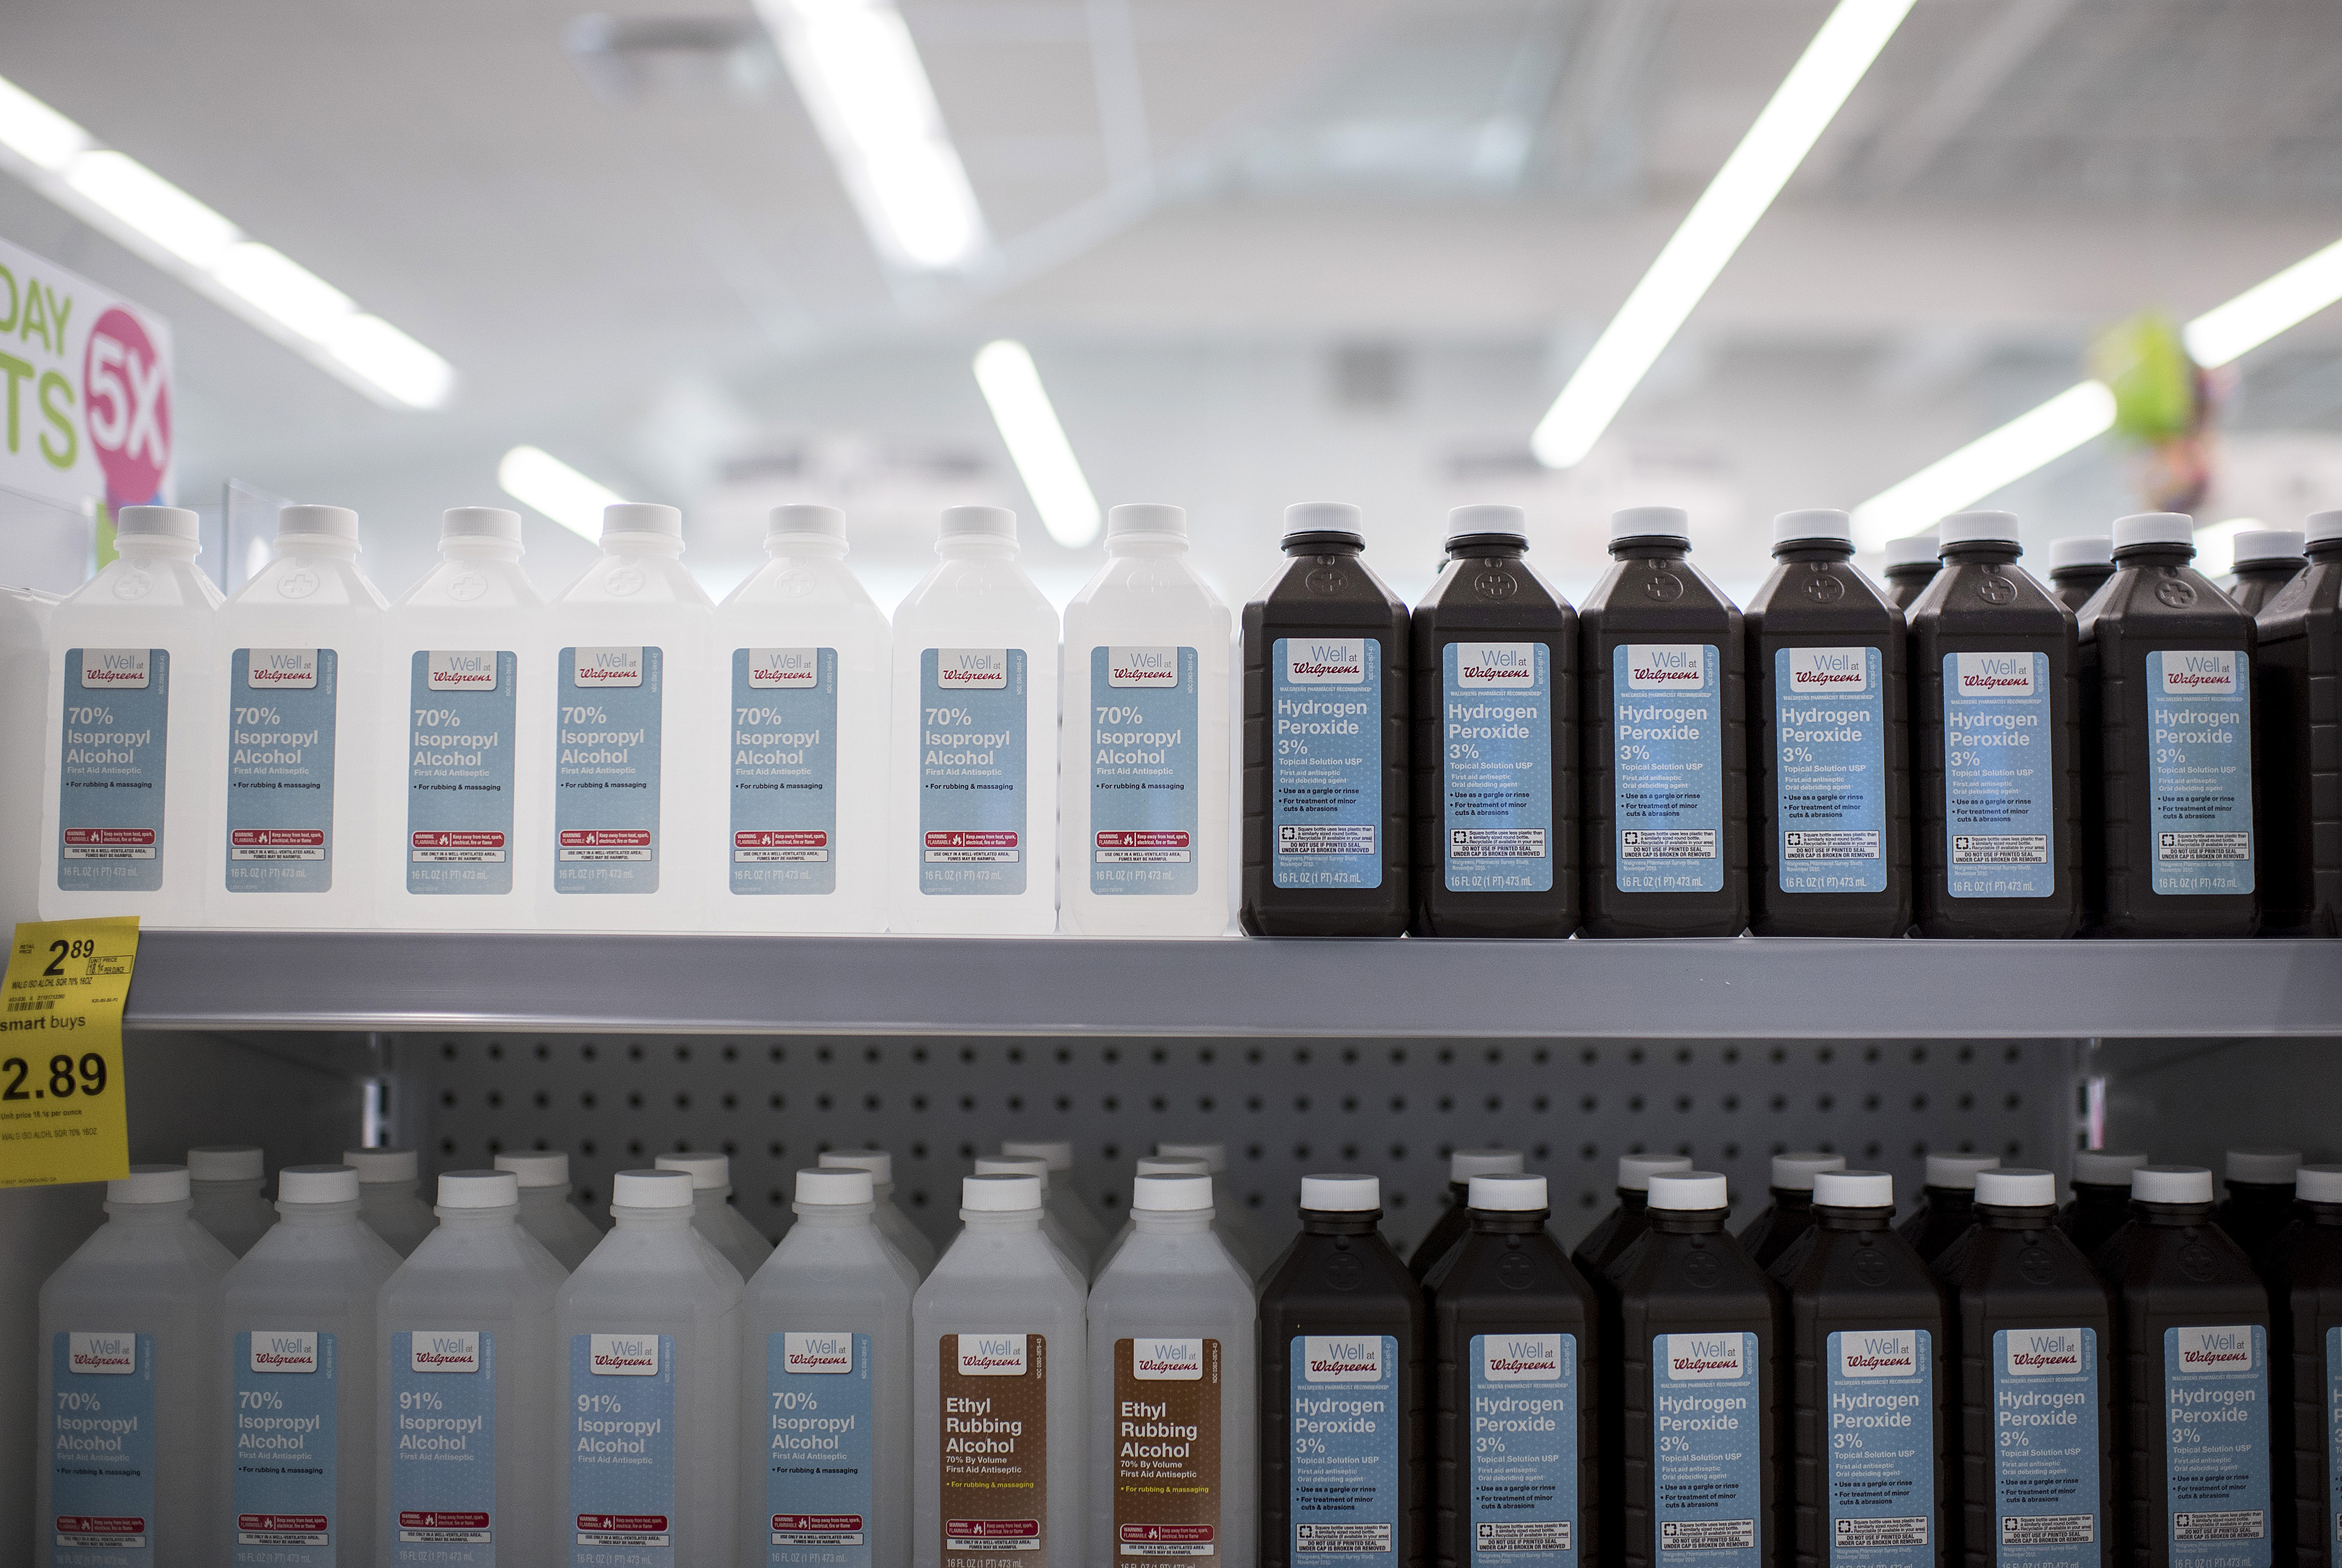 Bottles of rubbing alcohol and hydrogen peroxide are displayed for sale at a Walgreens Boots Alliance Inc. store in Elmwood Park, Illinois, U.S., on Tuesday, April 5, 2016. (Christopher Dilts&mdash;Bloomberg /Getty Images)